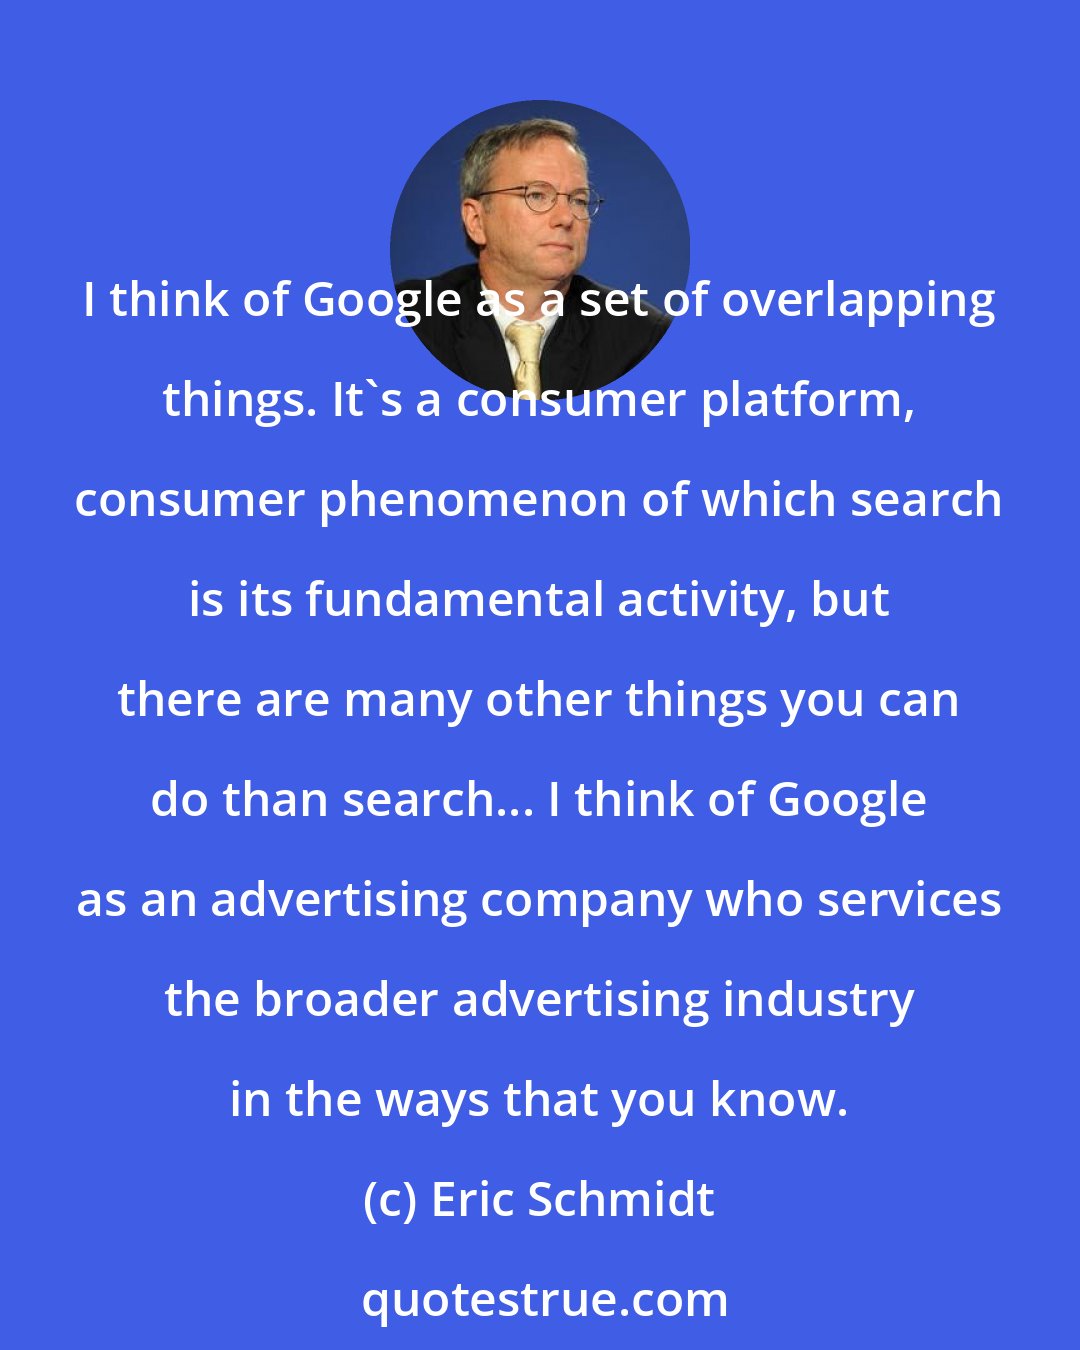 Eric Schmidt: I think of Google as a set of overlapping things. It's a consumer platform, consumer phenomenon of which search is its fundamental activity, but there are many other things you can do than search... I think of Google as an advertising company who services the broader advertising industry in the ways that you know.